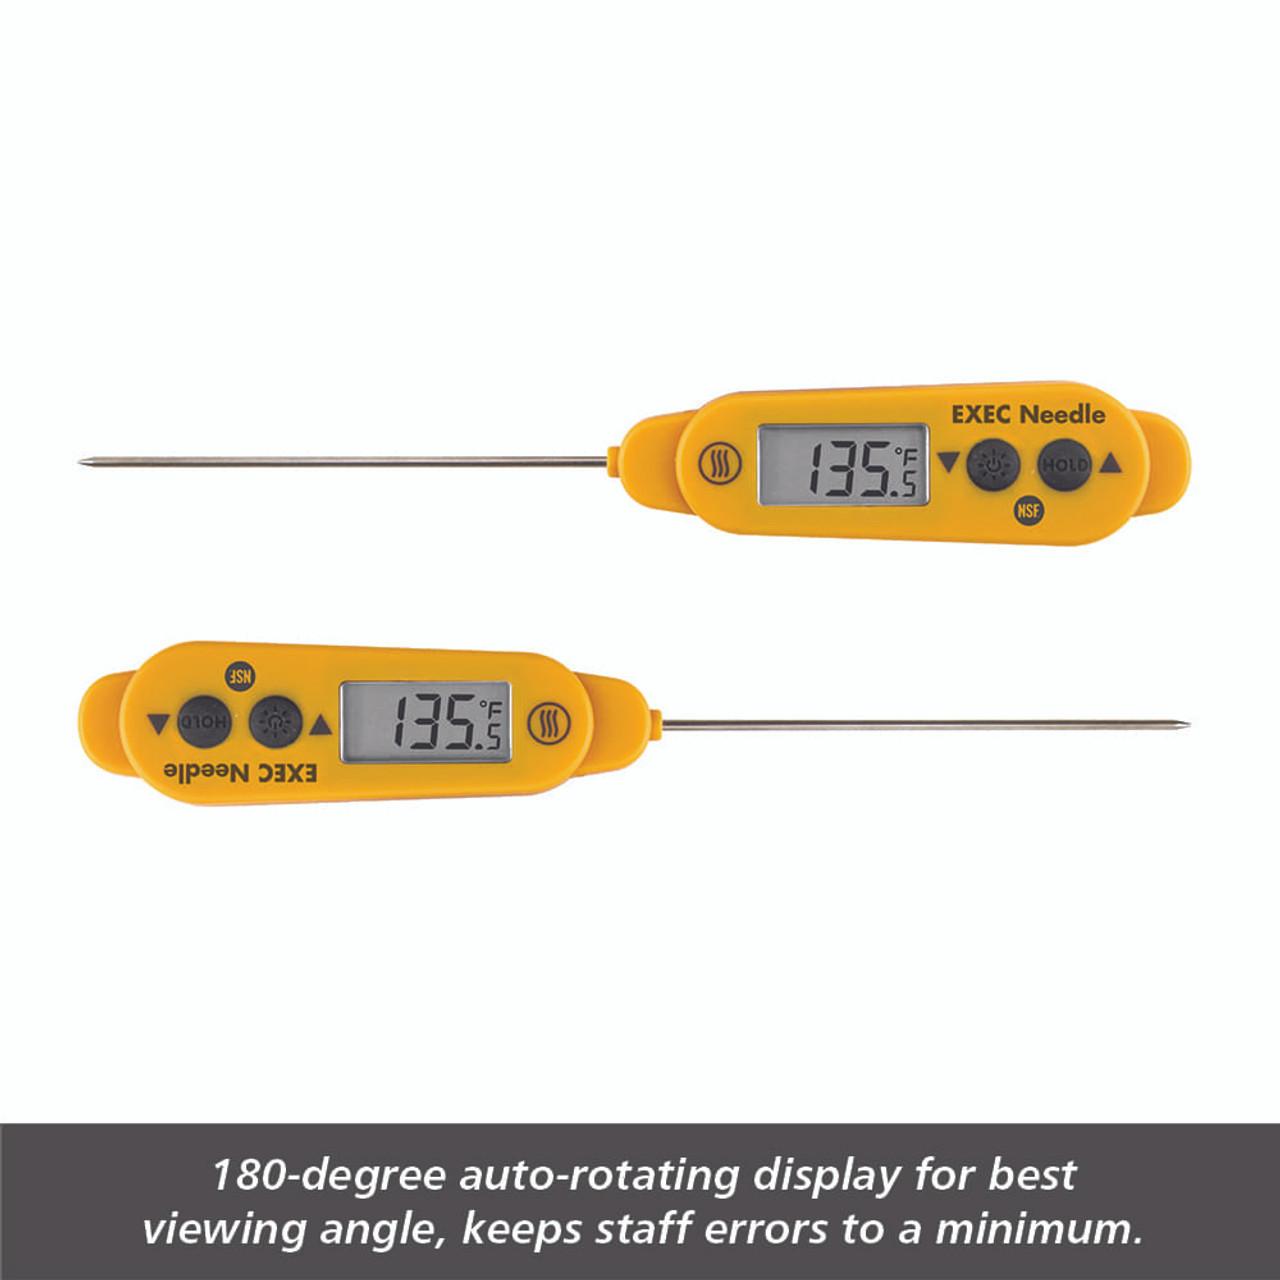 ThermoWorks Executive Series Pocket Thermometer | American Fire BBQ & Grilling Supply White